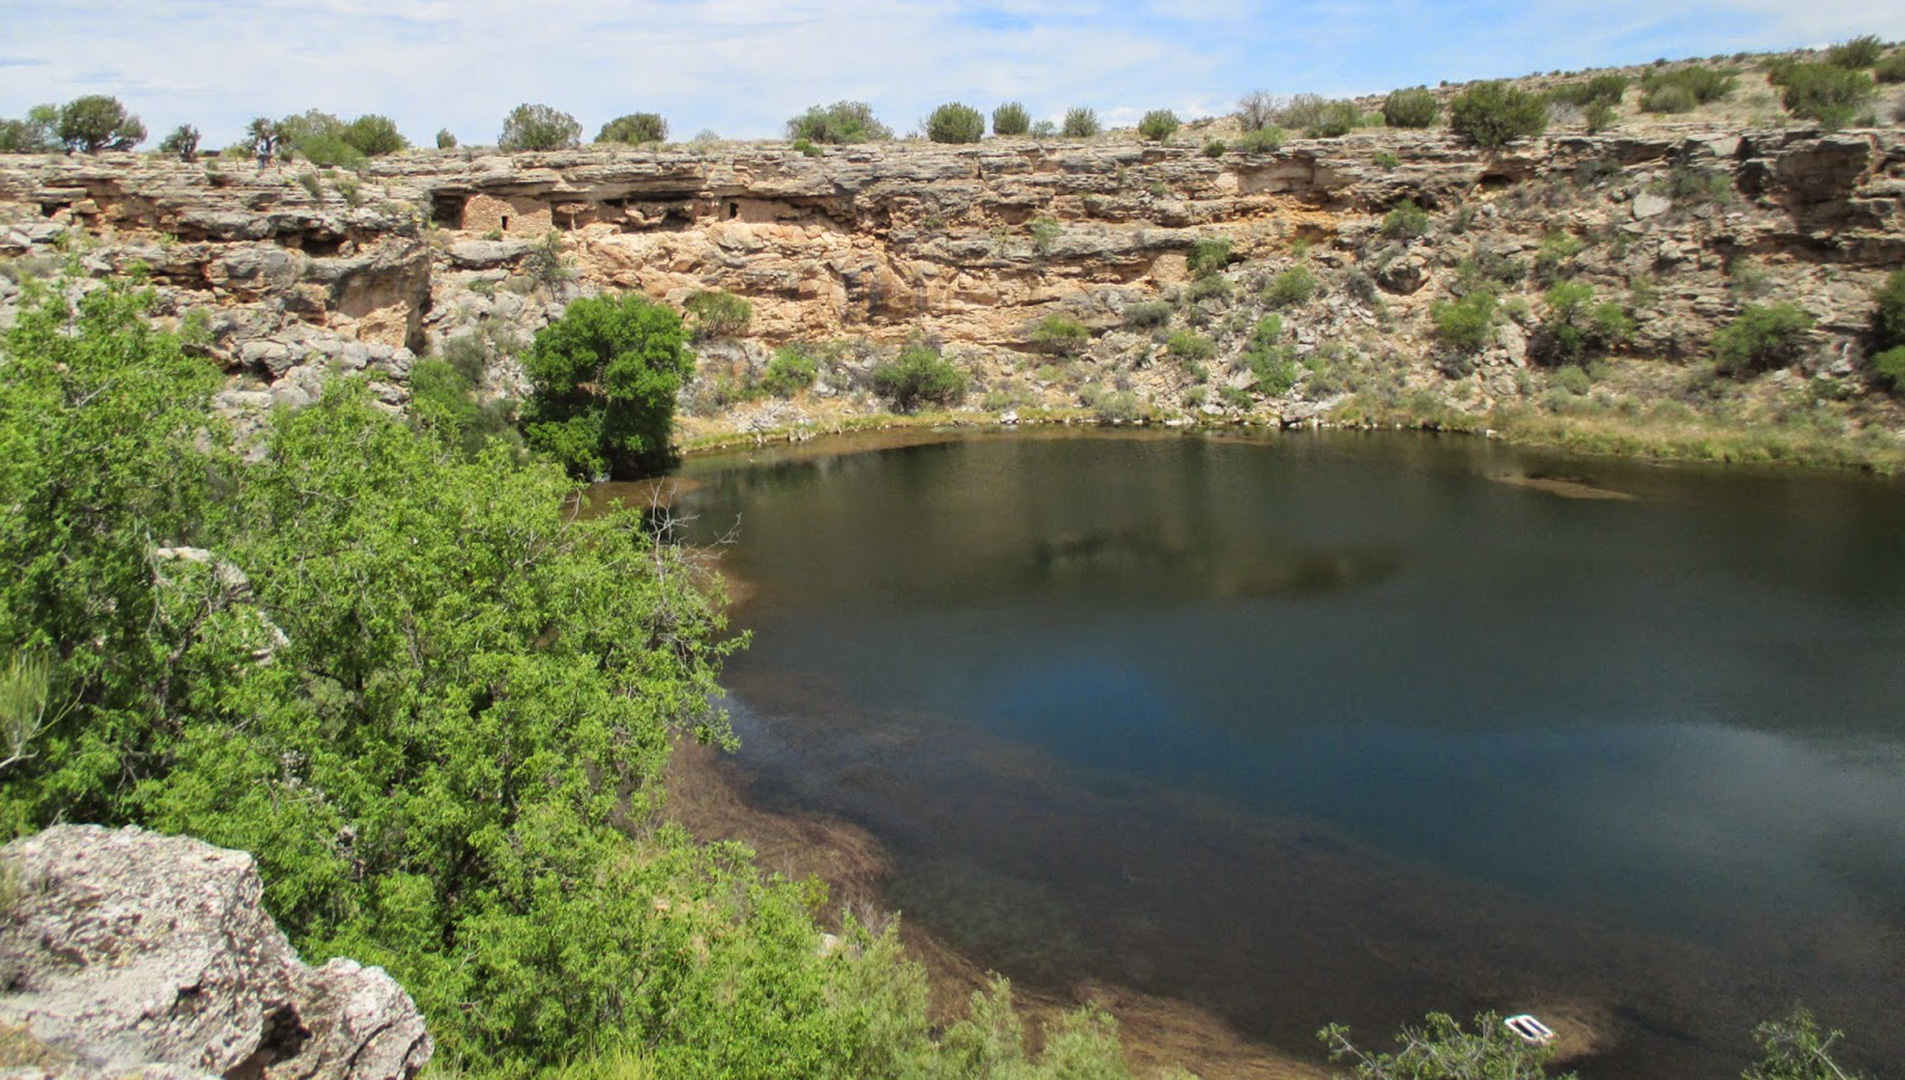 Ancient cliff dwelling is perched above the waters of an oasis desert sinkhole.